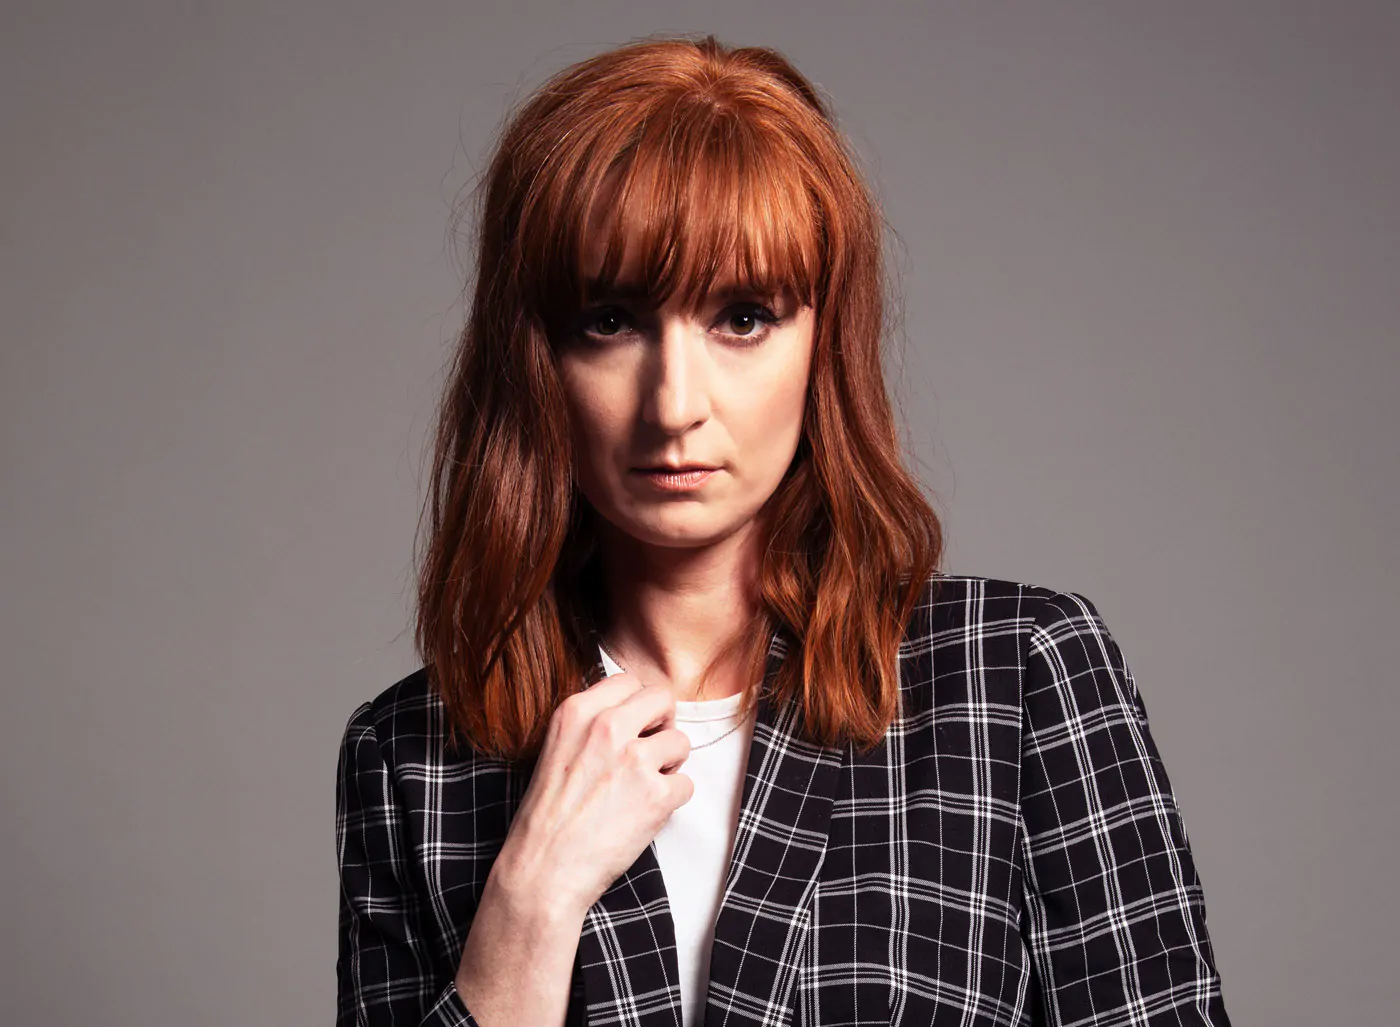 INTERVIEW: LoneLady on her new album ‘Former Things’